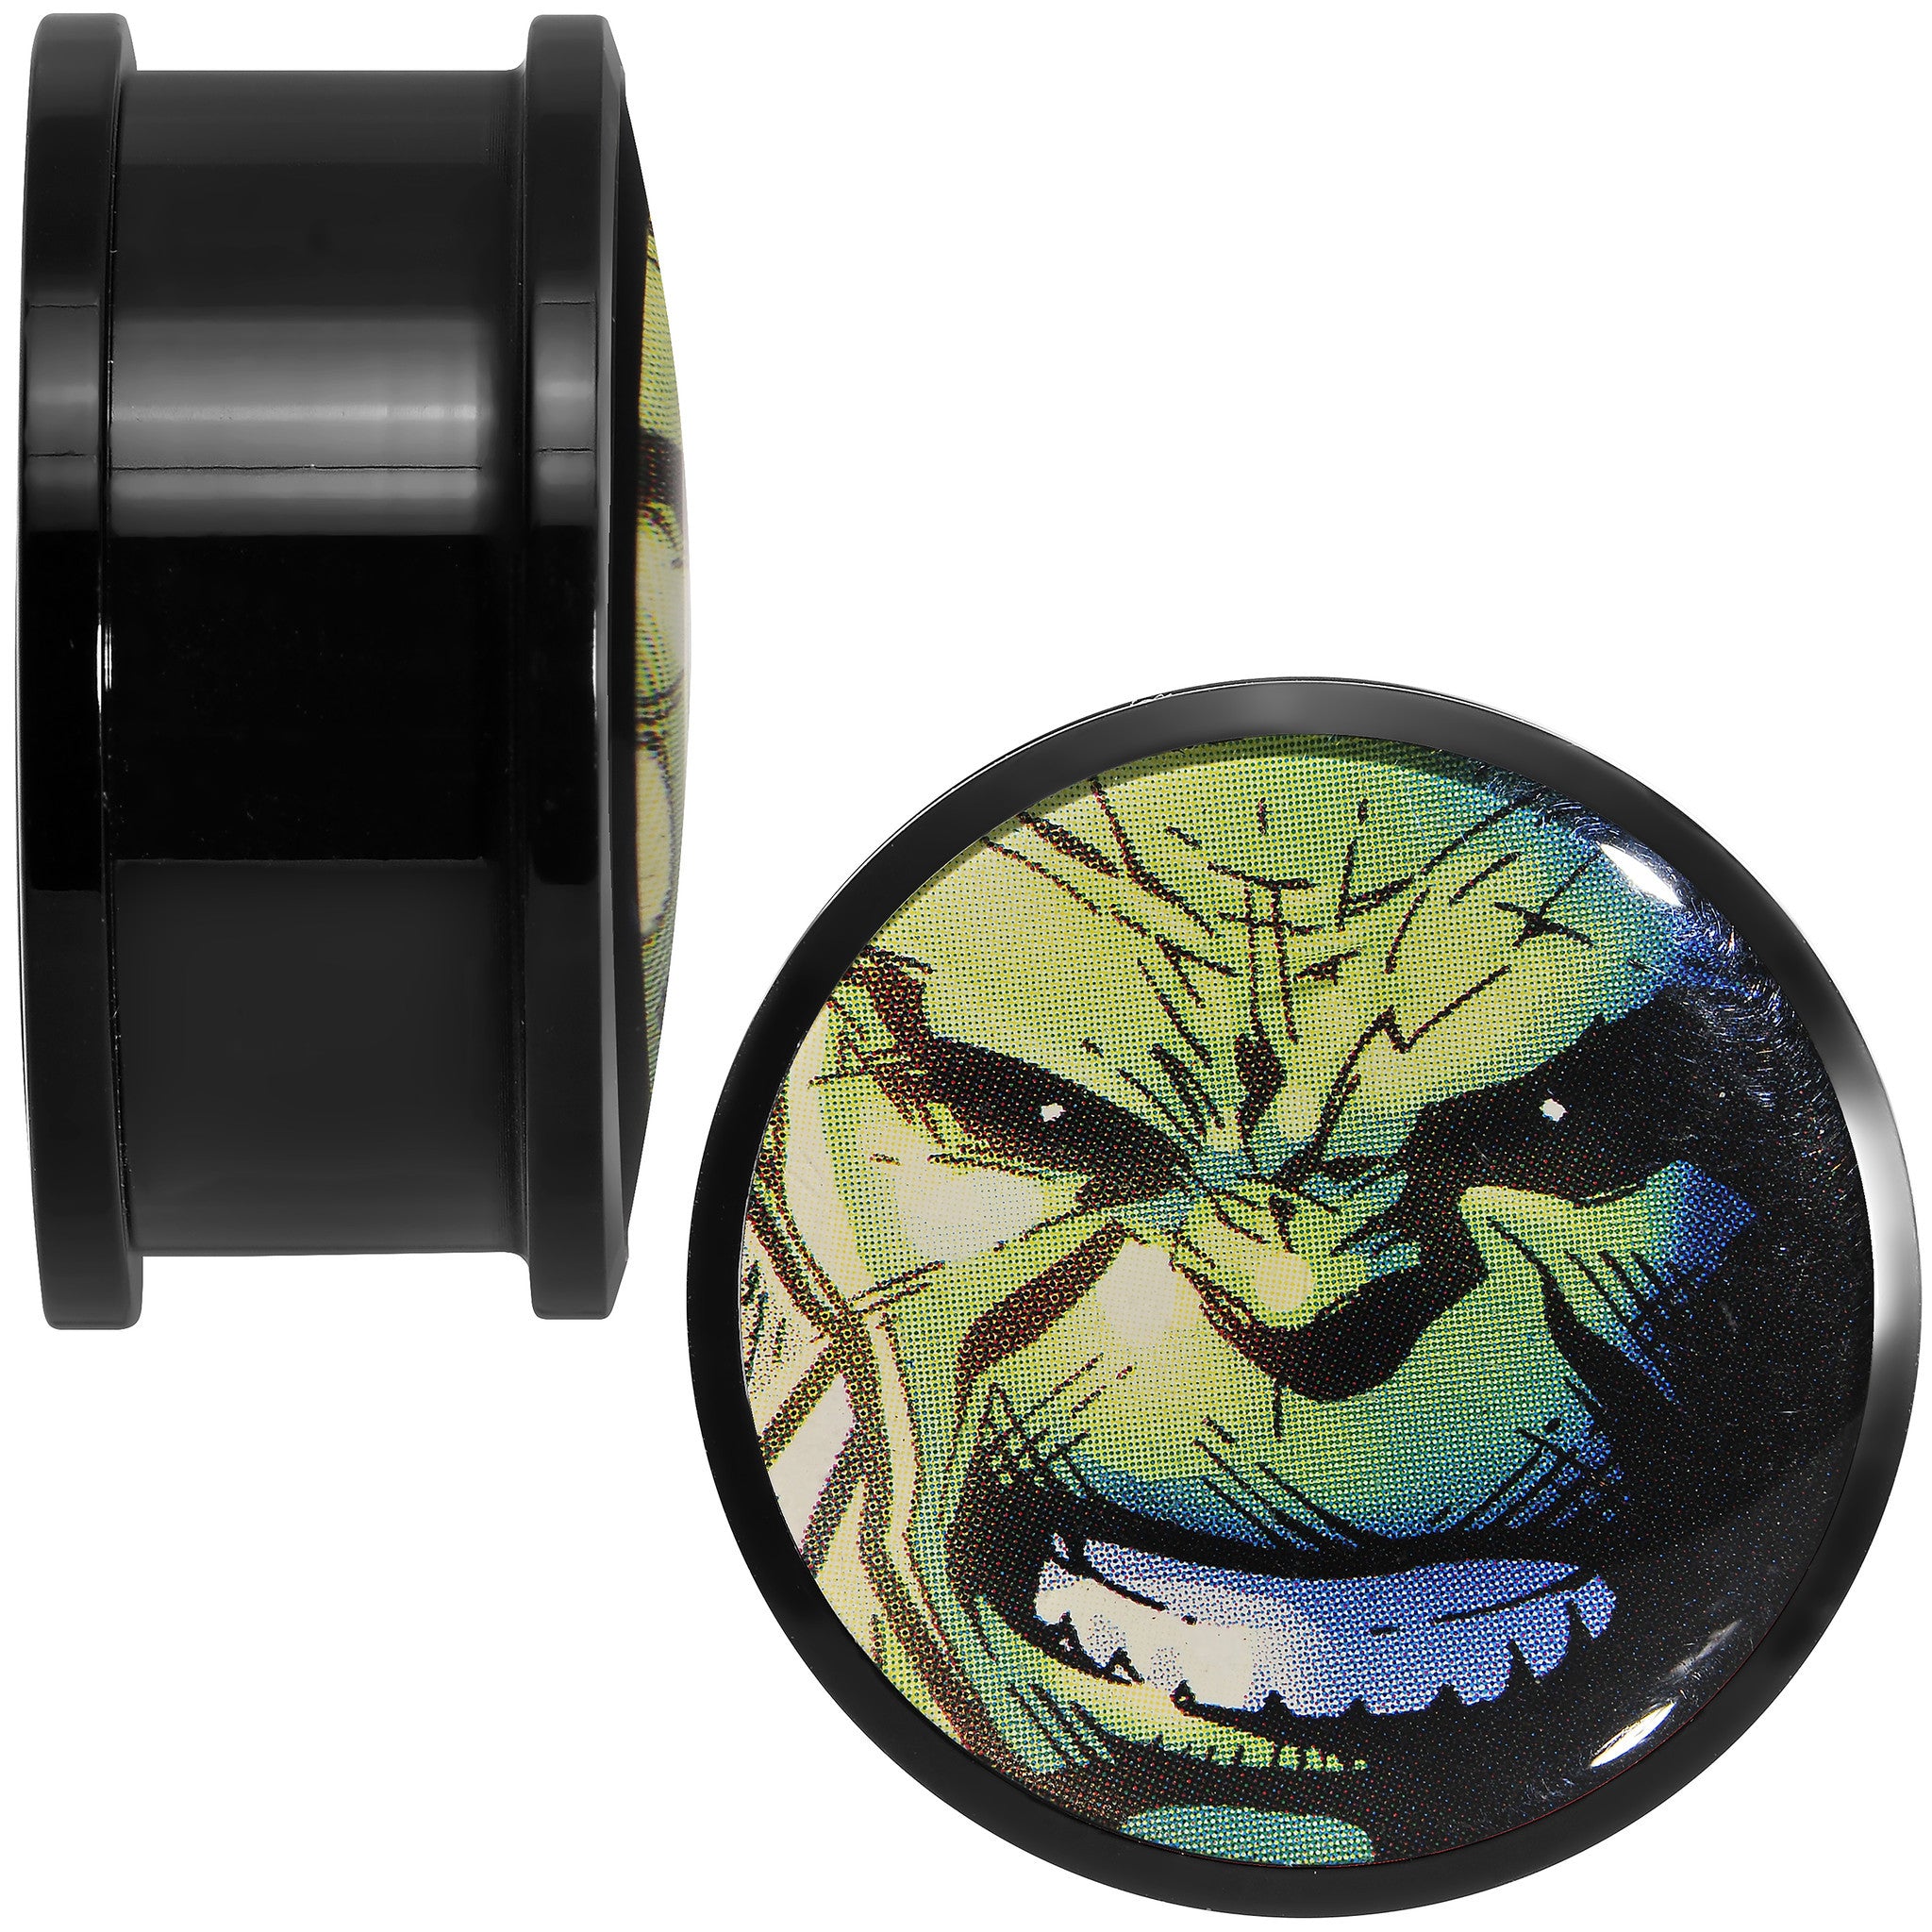 1 inch Licensed The Incredible Hulk Acrylic Screw Fit Plugs Set